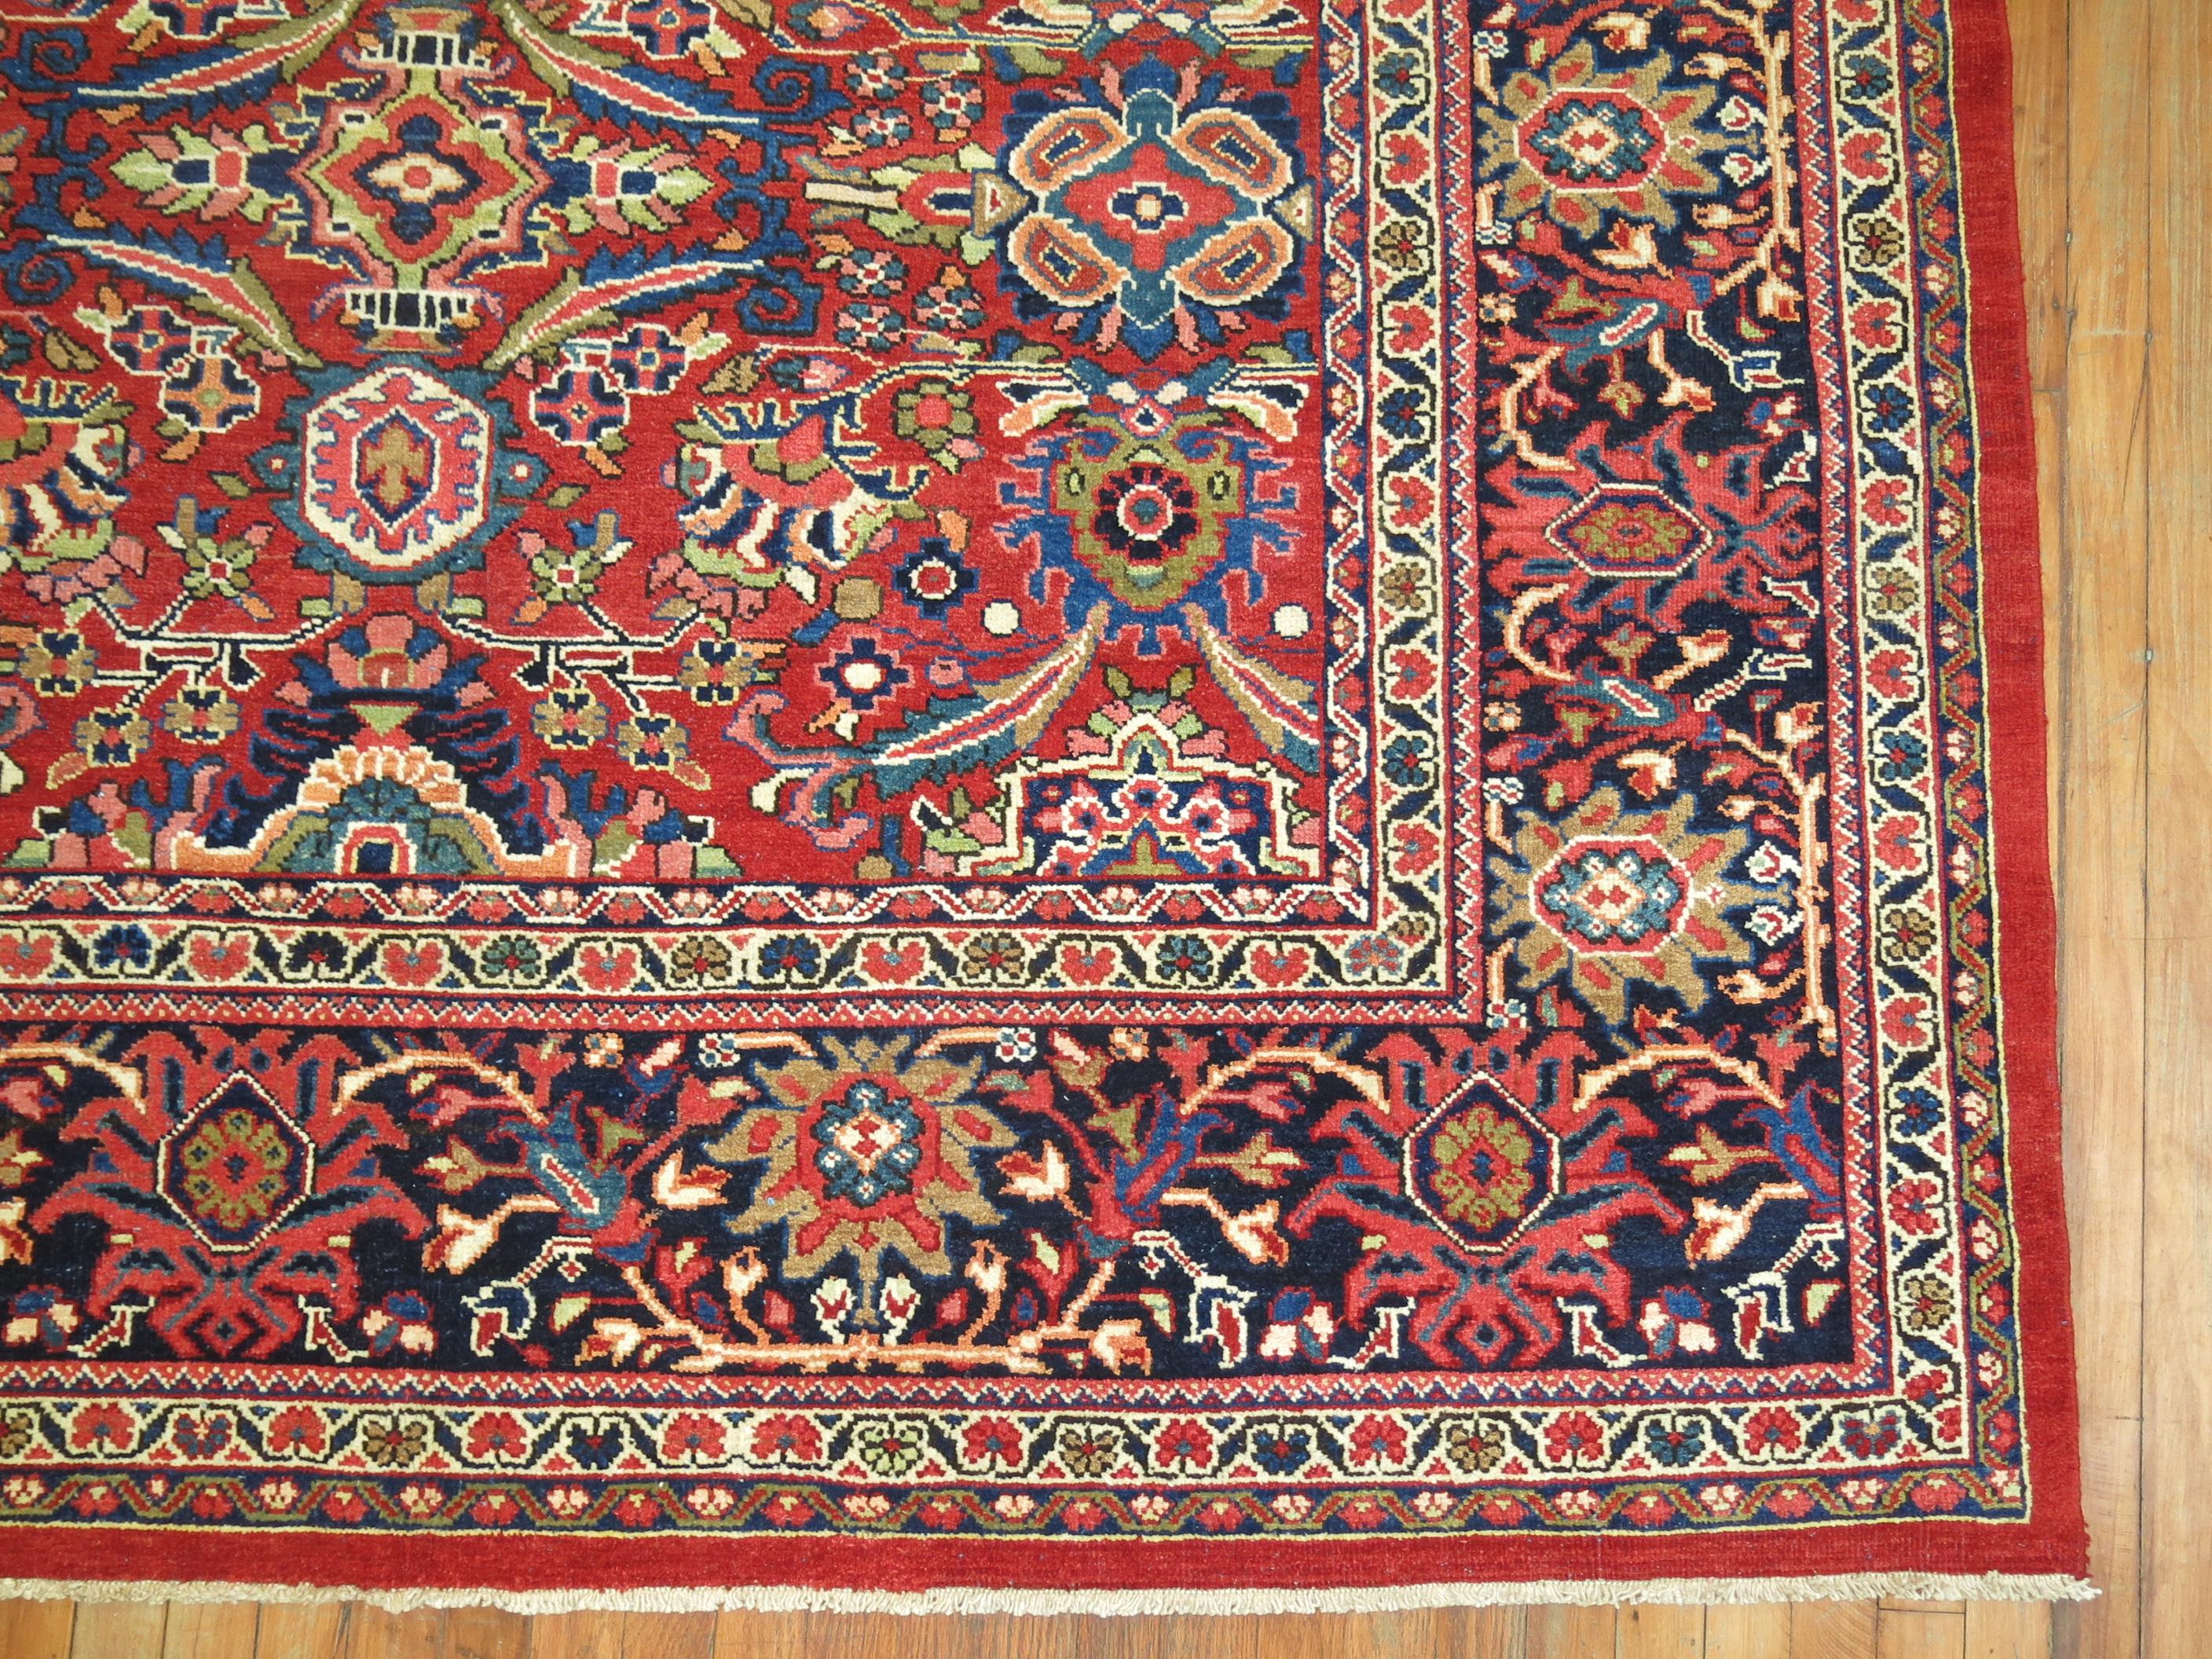 Full pile red and blue high quality Antique Persian Mahal rug.